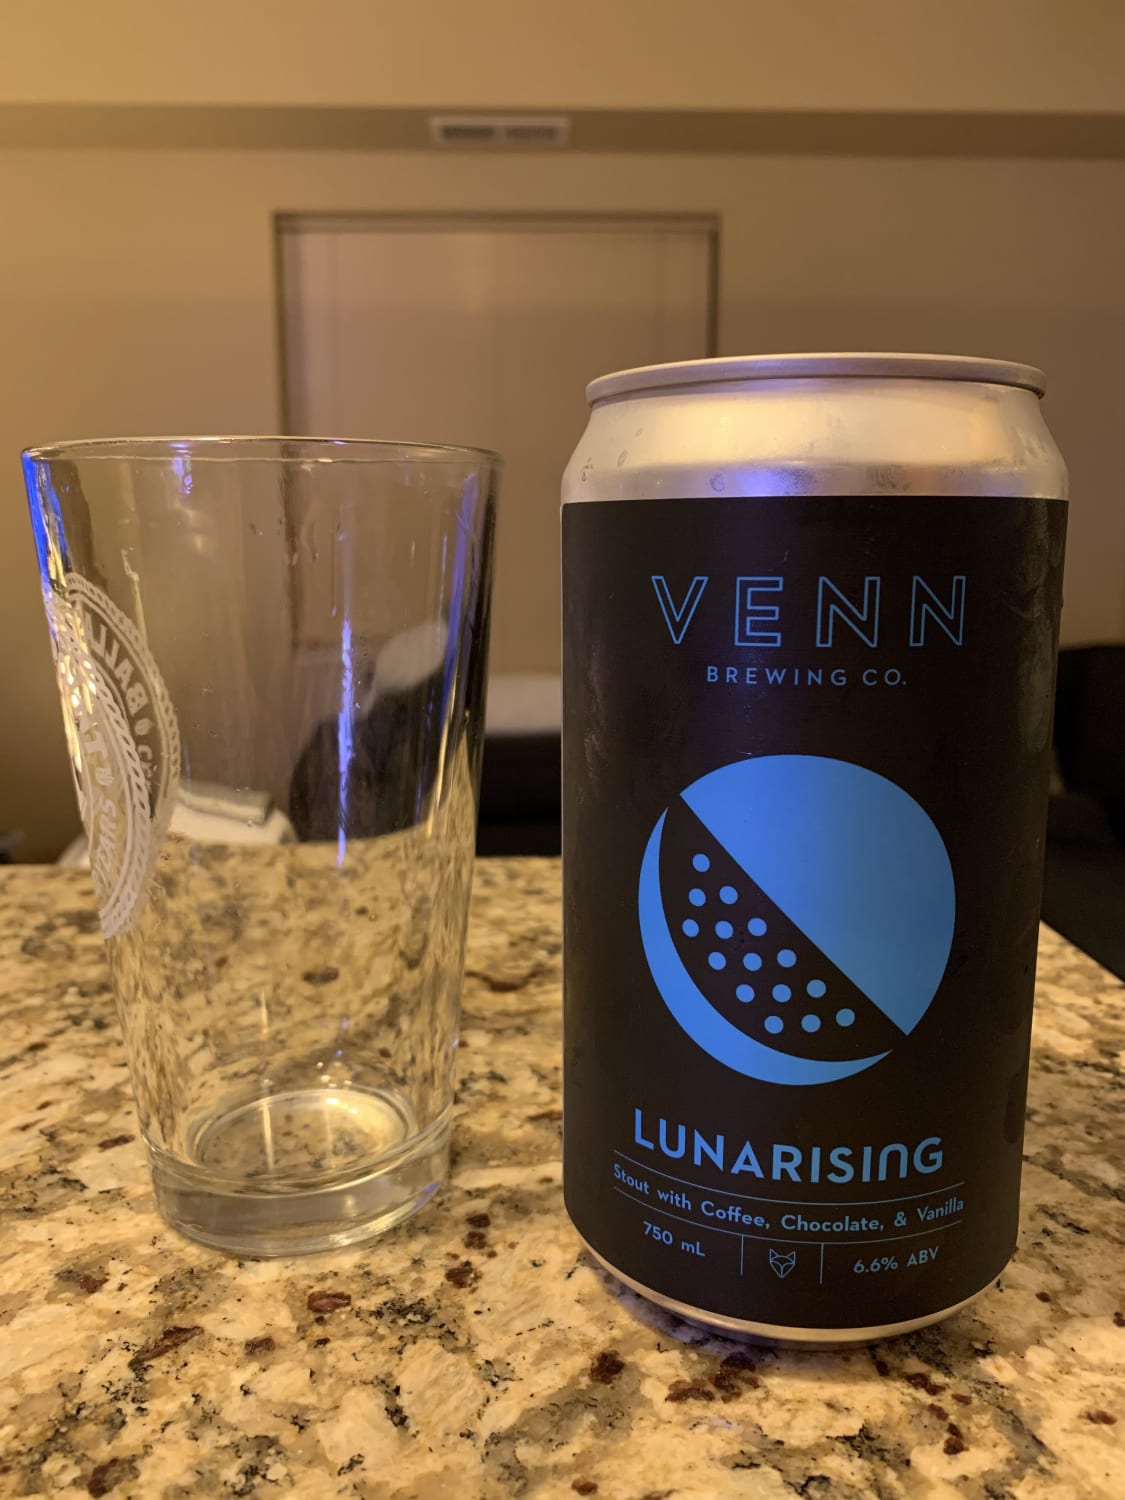 My local brewery’s best beer. The crowler has both a crescent and whole moon, and the crescent is made out of a cacao bean. Bonus that the brewery is named after the circles a la Venn diagrams.